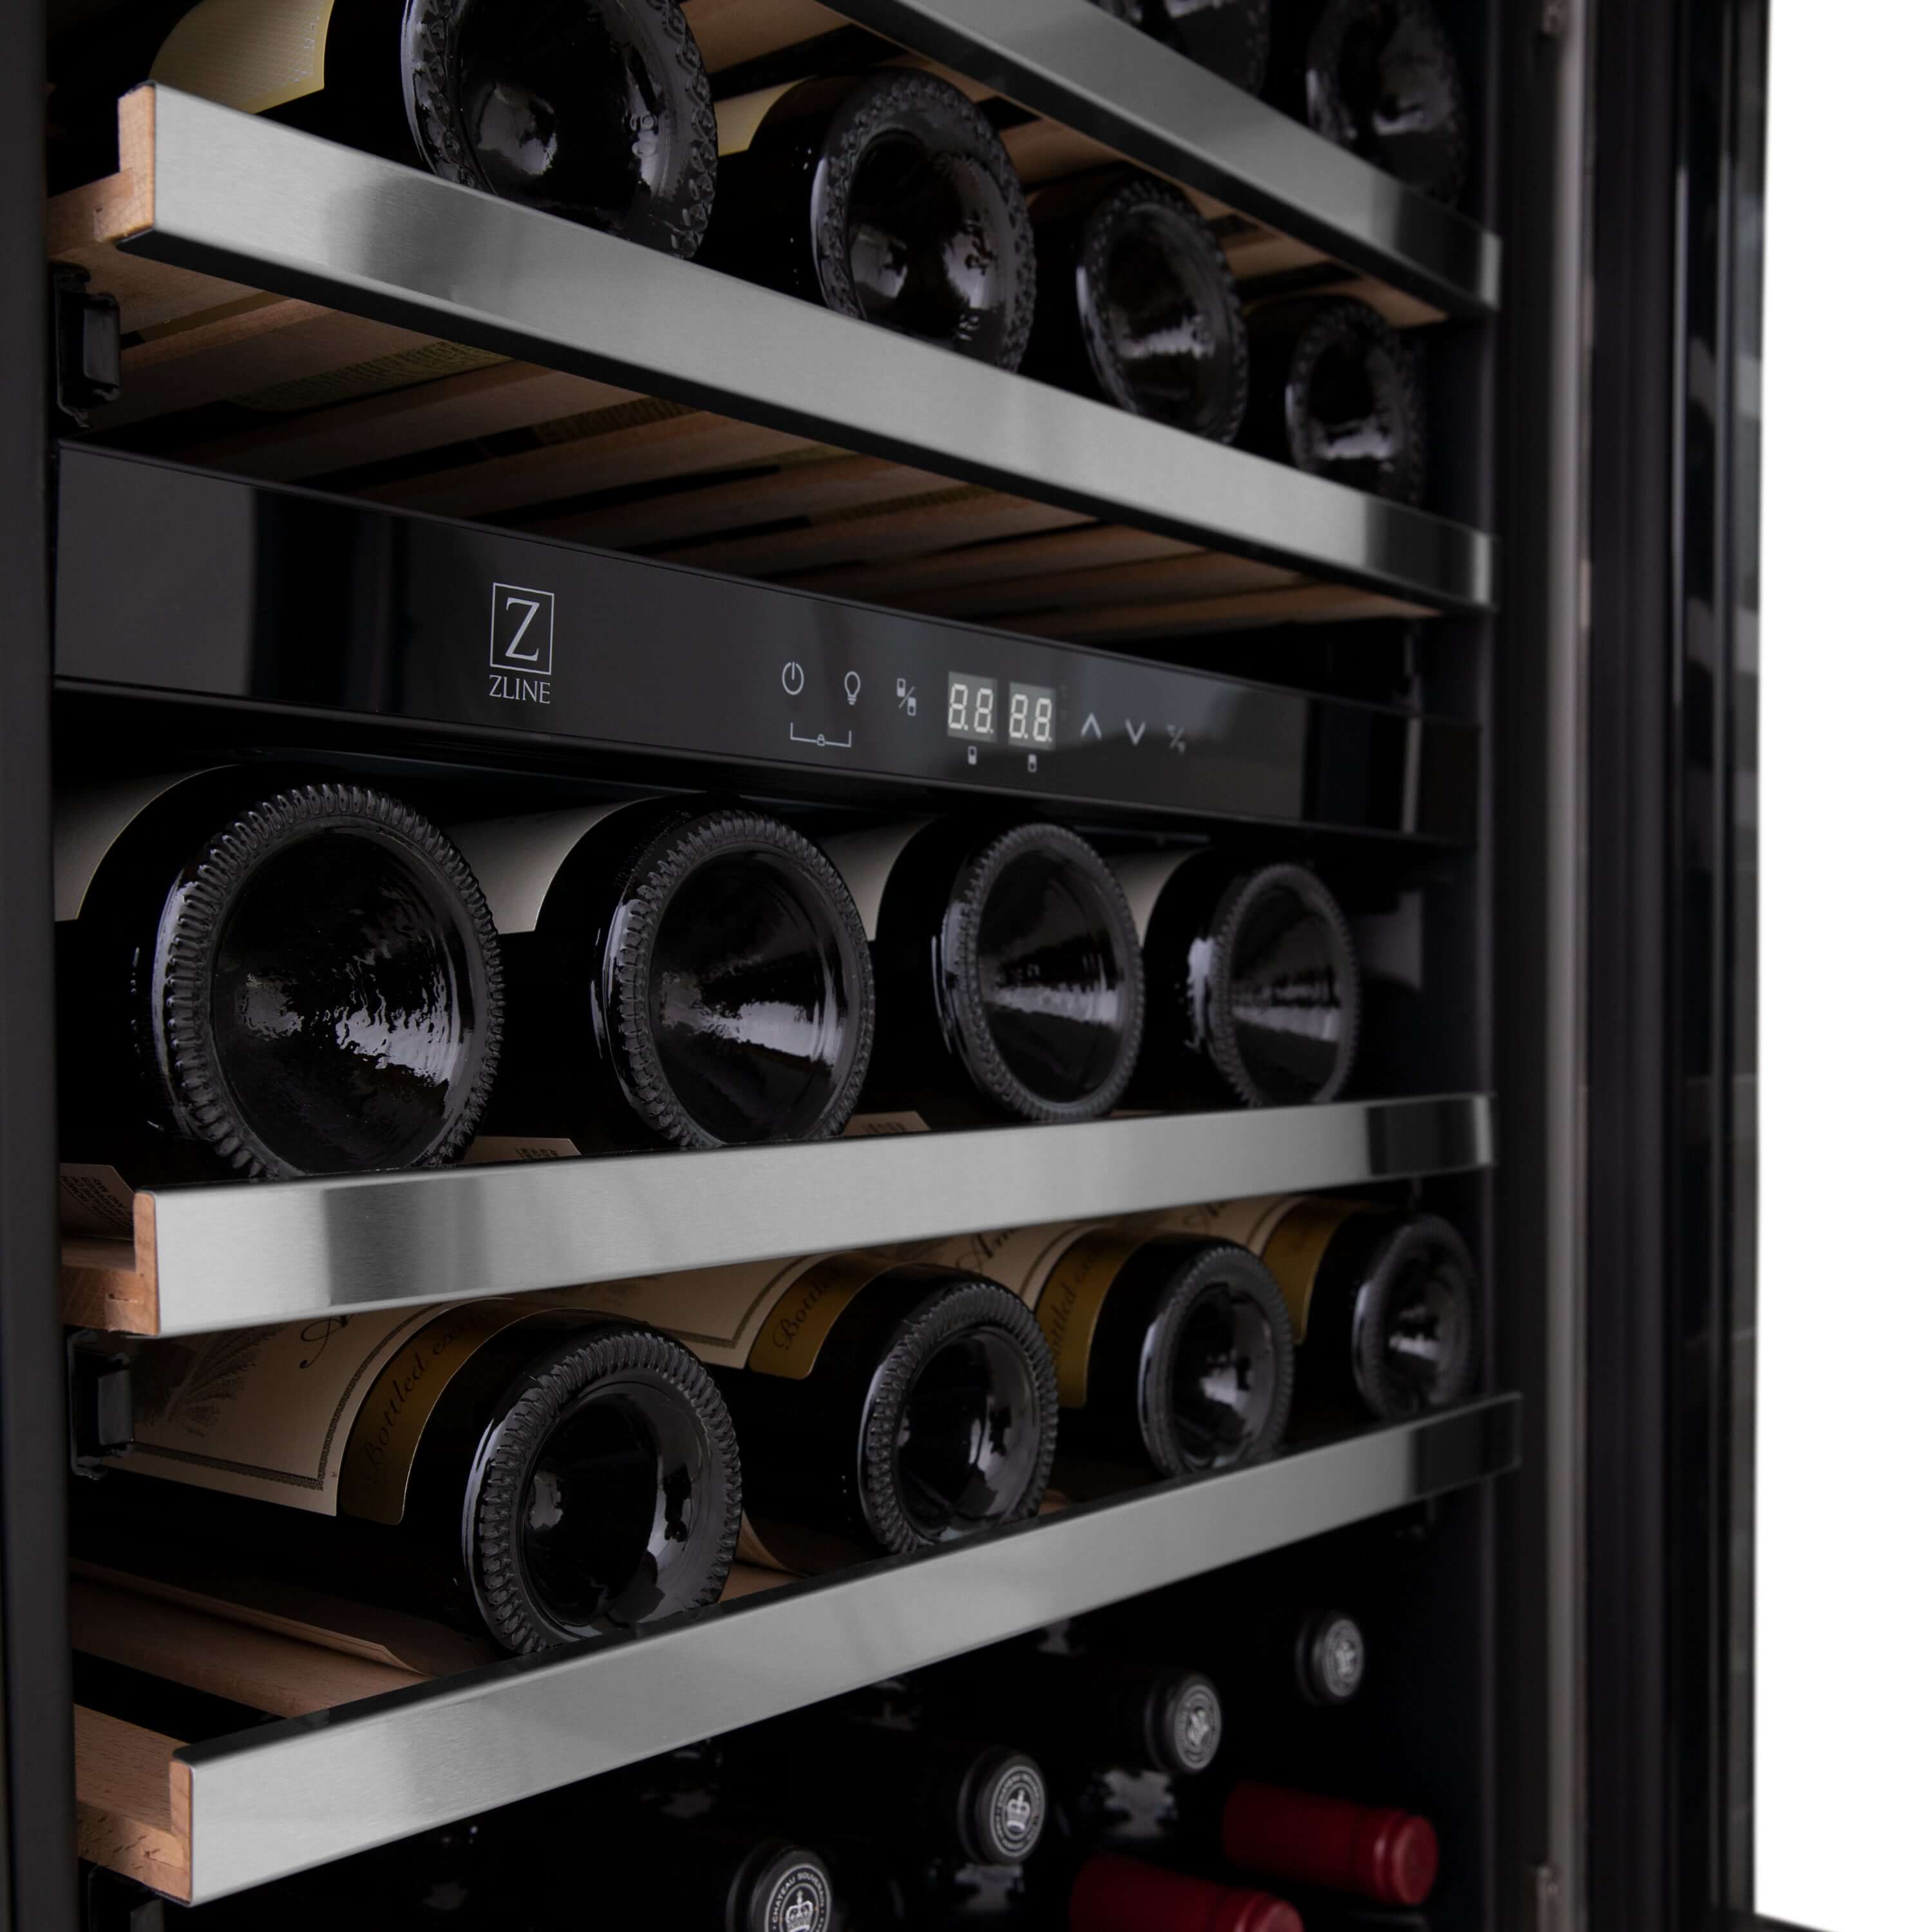 ZLINE Autograph Edition 24 in. Monument Dual Zone 44-Bottle Wine Cooler in Stainless Steel with Champagne Bronze Accents (RWVZ-UD-24-CB) close-up, racks of red and white wine bottles stored on adjustable wood shelves.